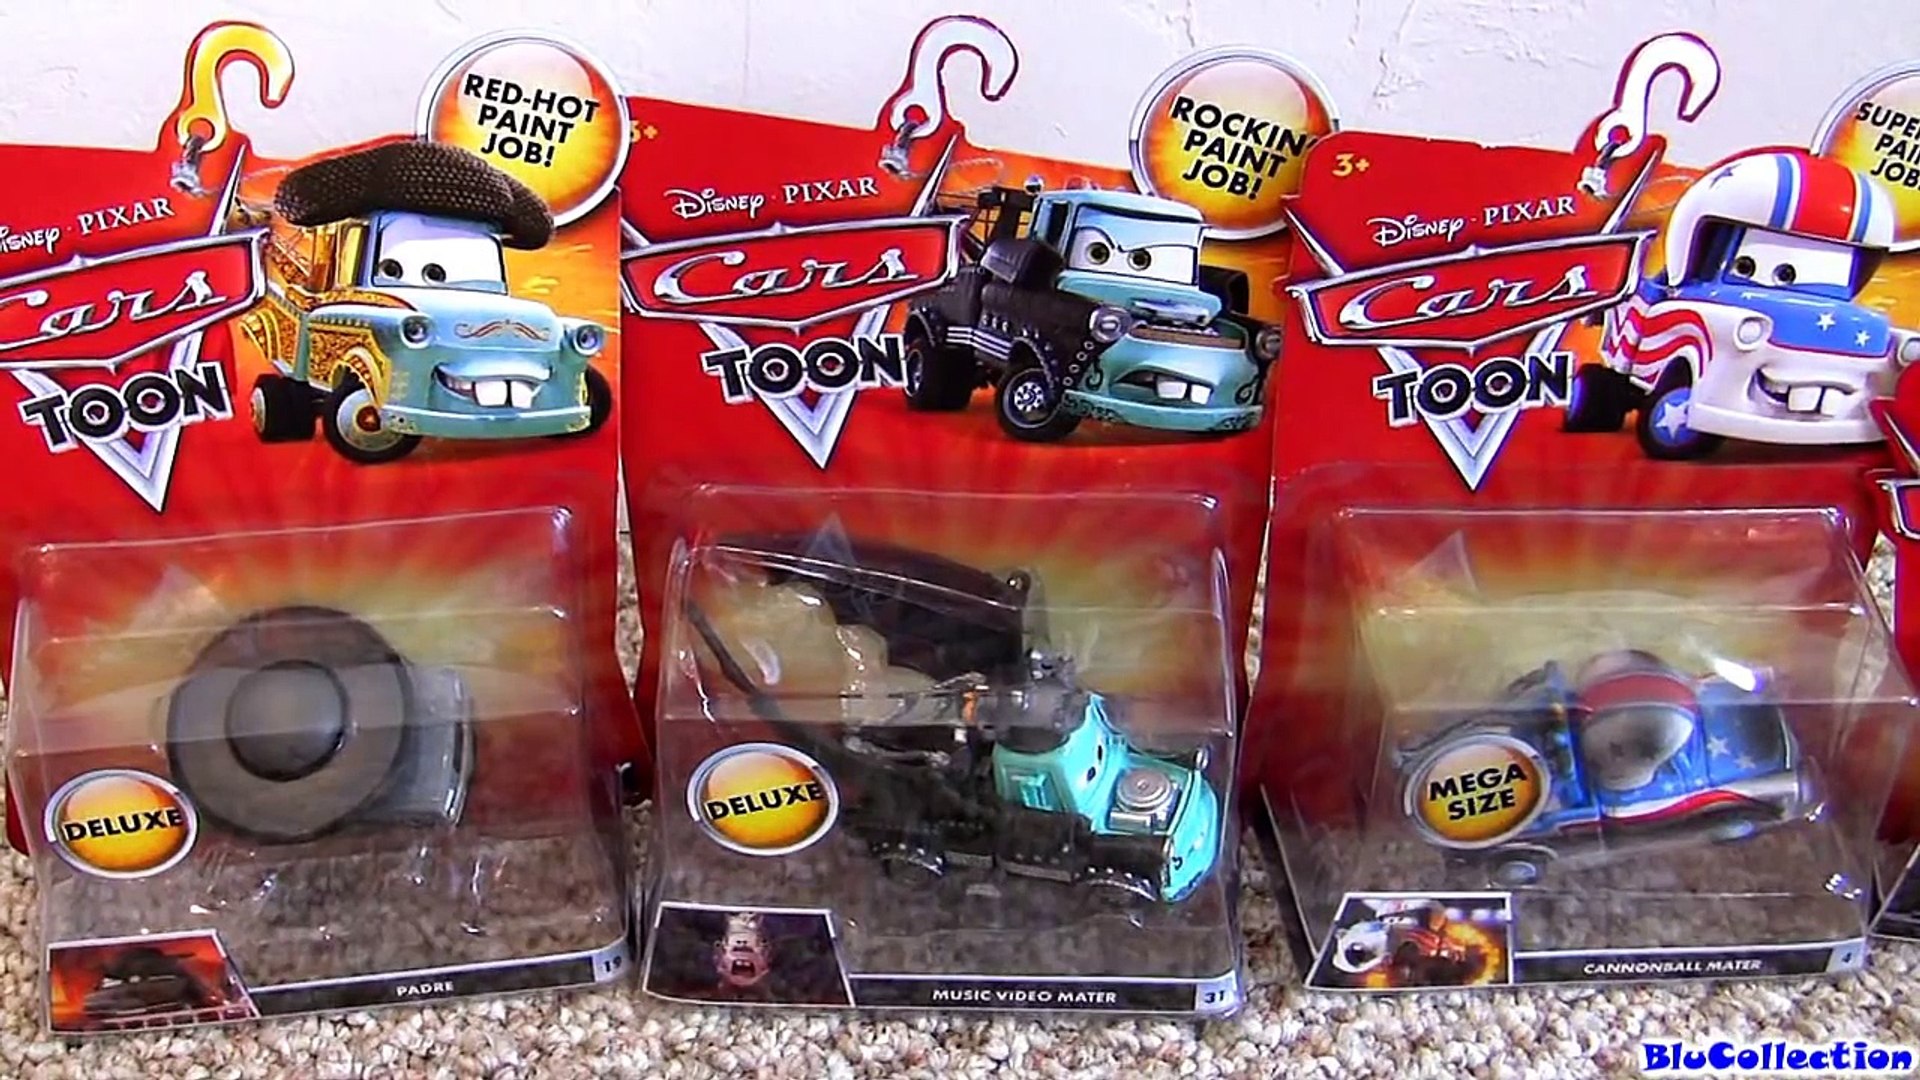 heavy metal mater toy